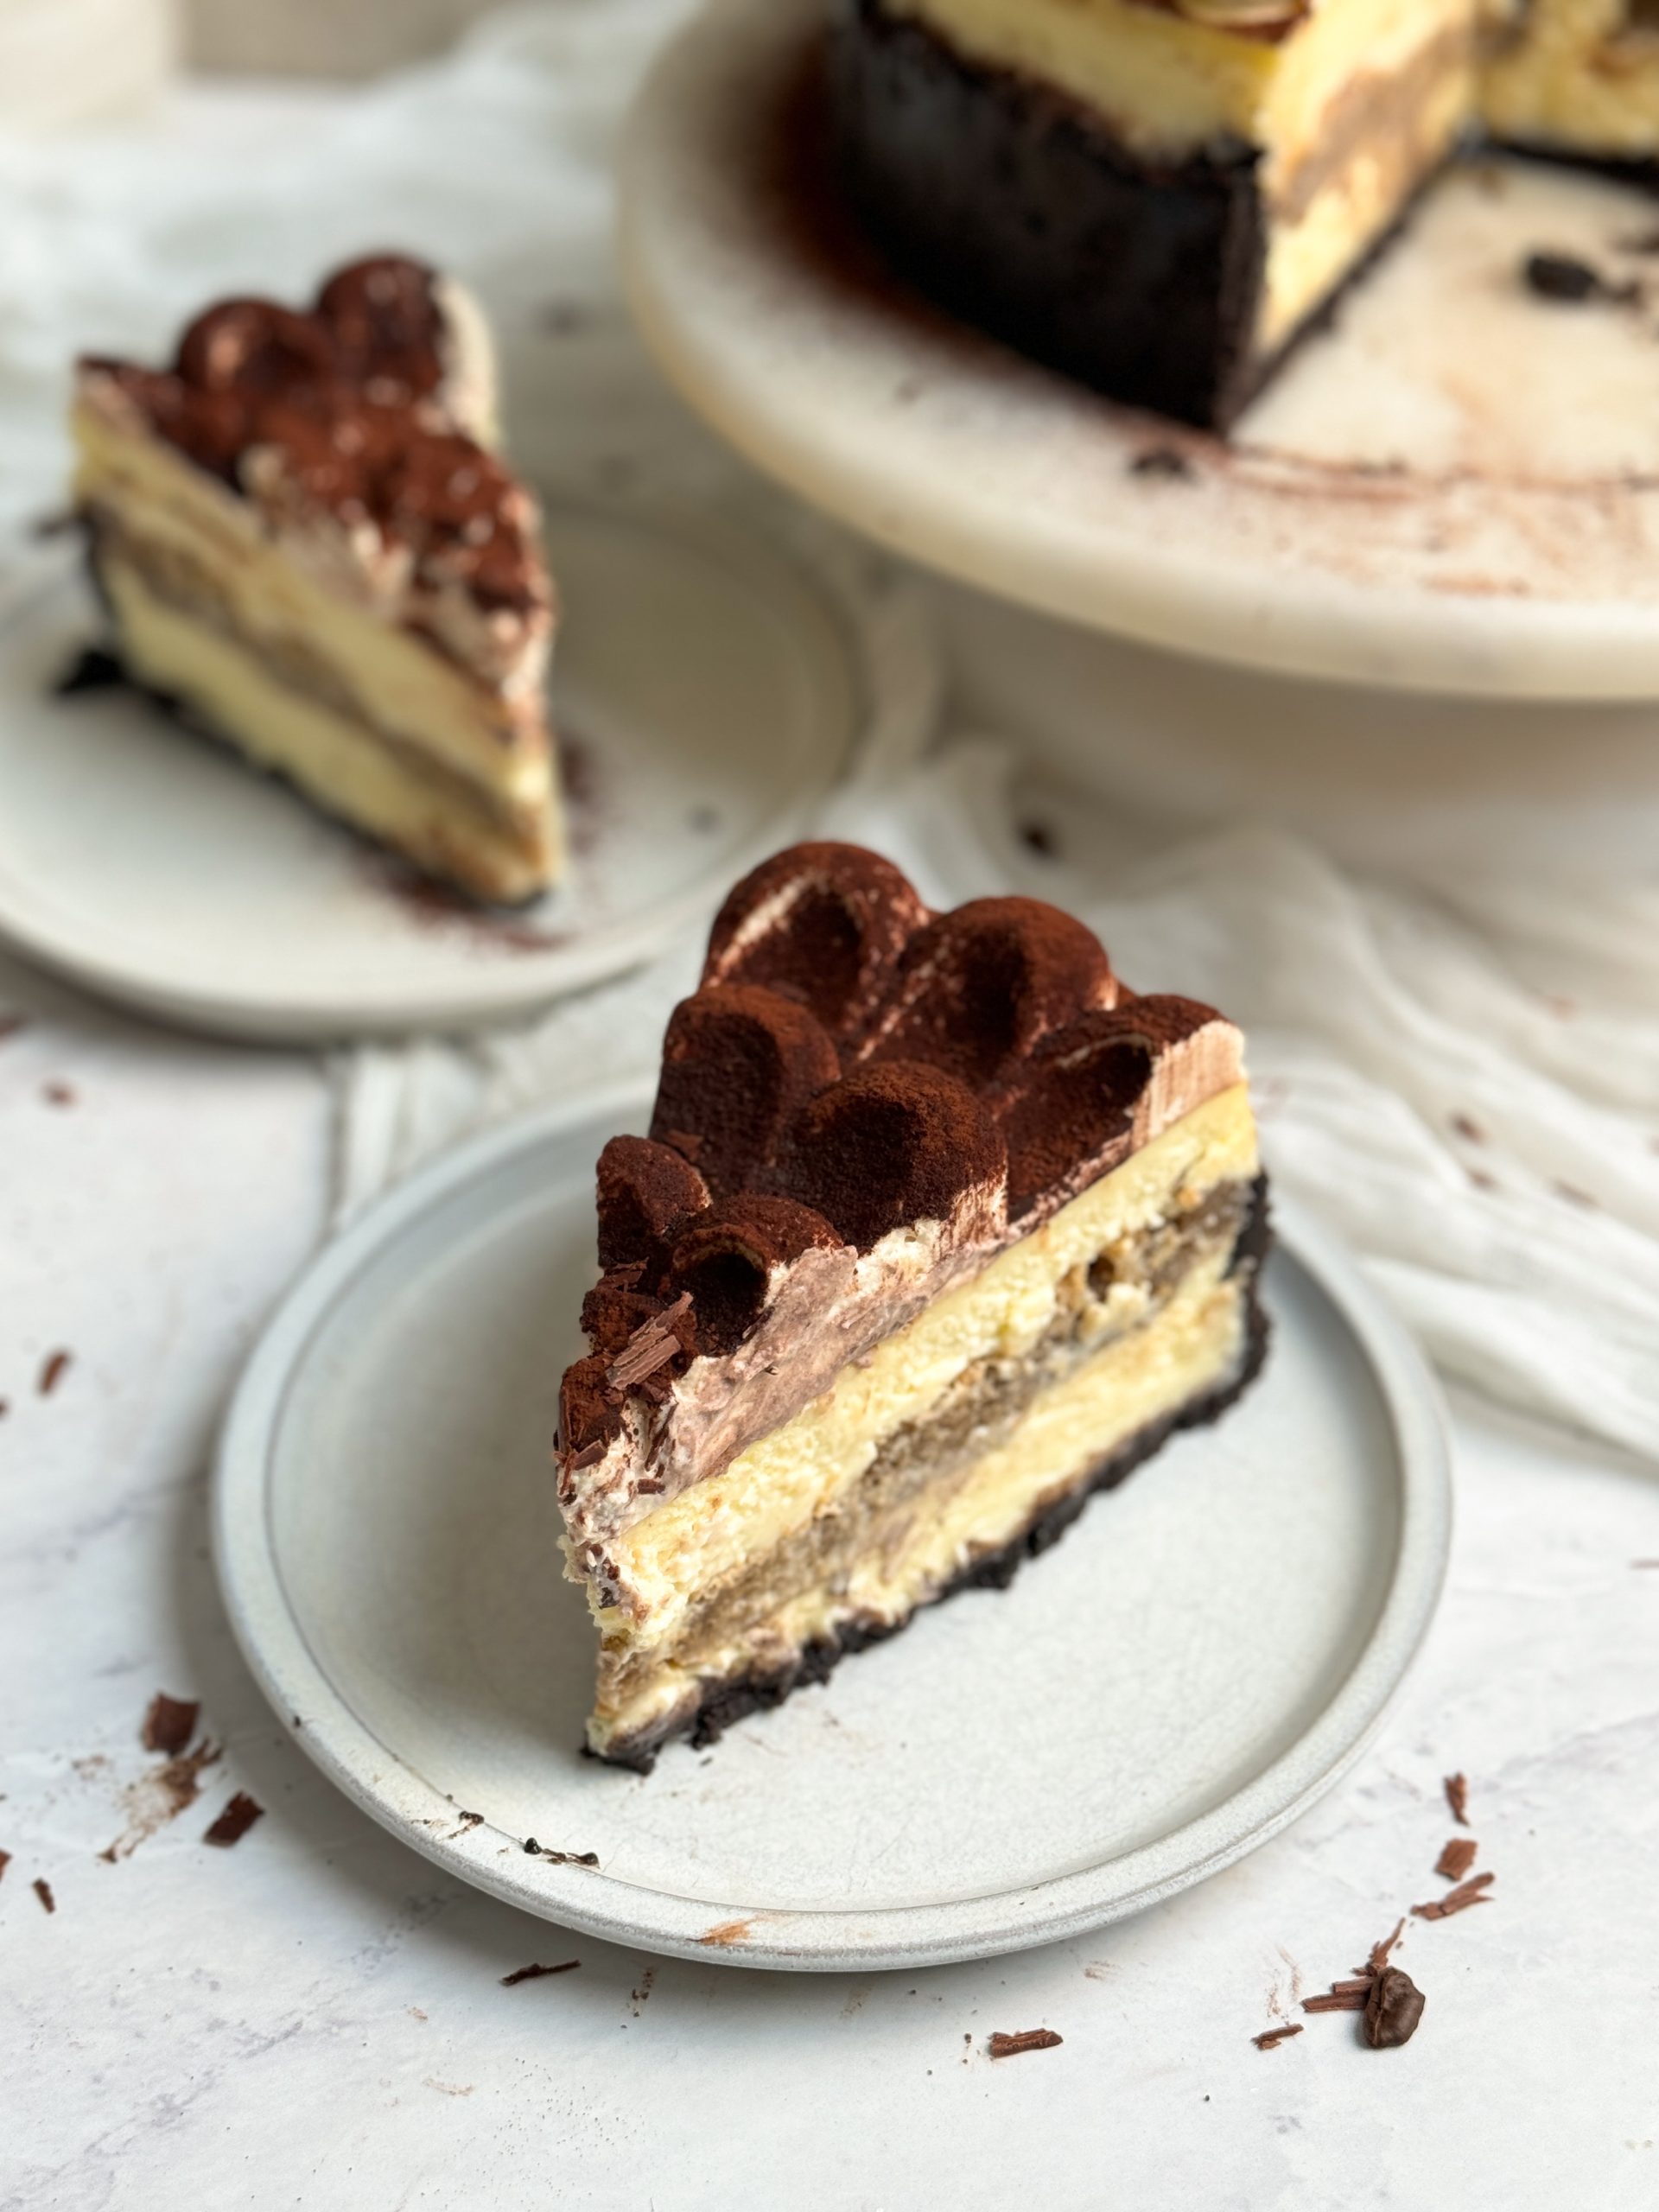 a slice of baked tiramisu cheesecake on a small plate, with a chocolate crust, creamy cheesecake interior, coffee soaked ladyfingers in the middle, and mascarpone cream with cocoa powder on top. Another slice in the background